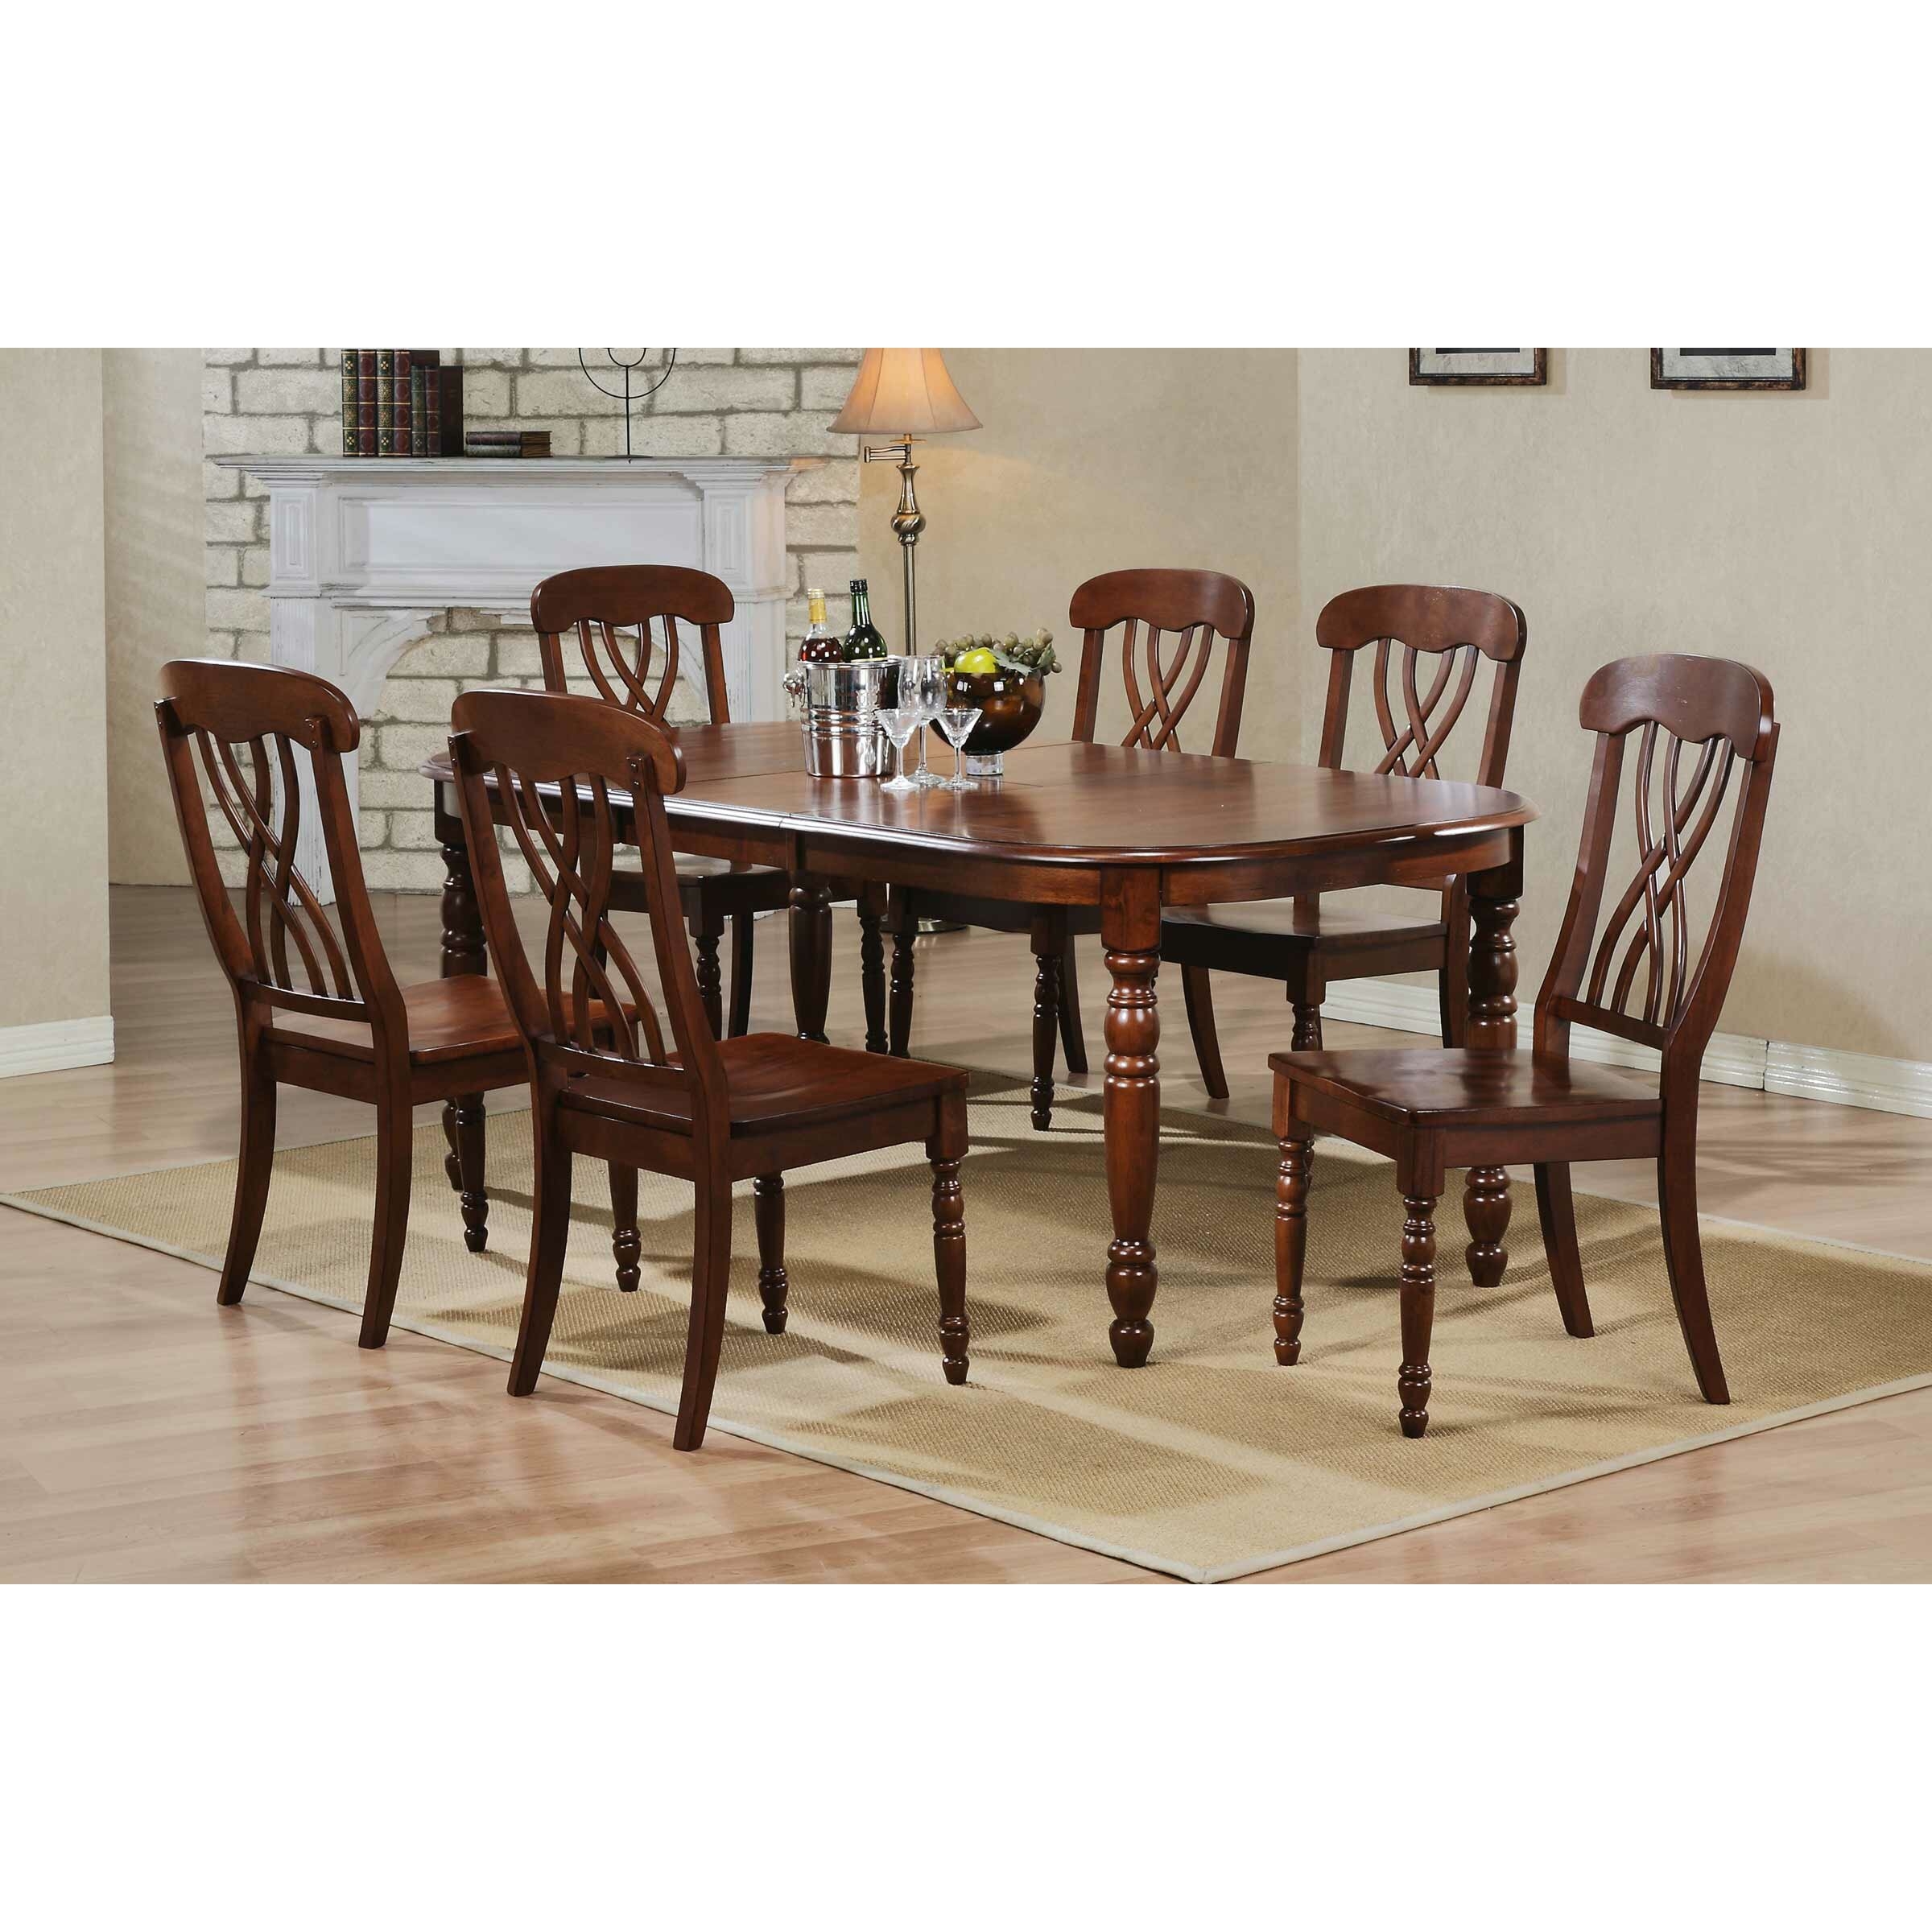 Pelican Point Dining Table